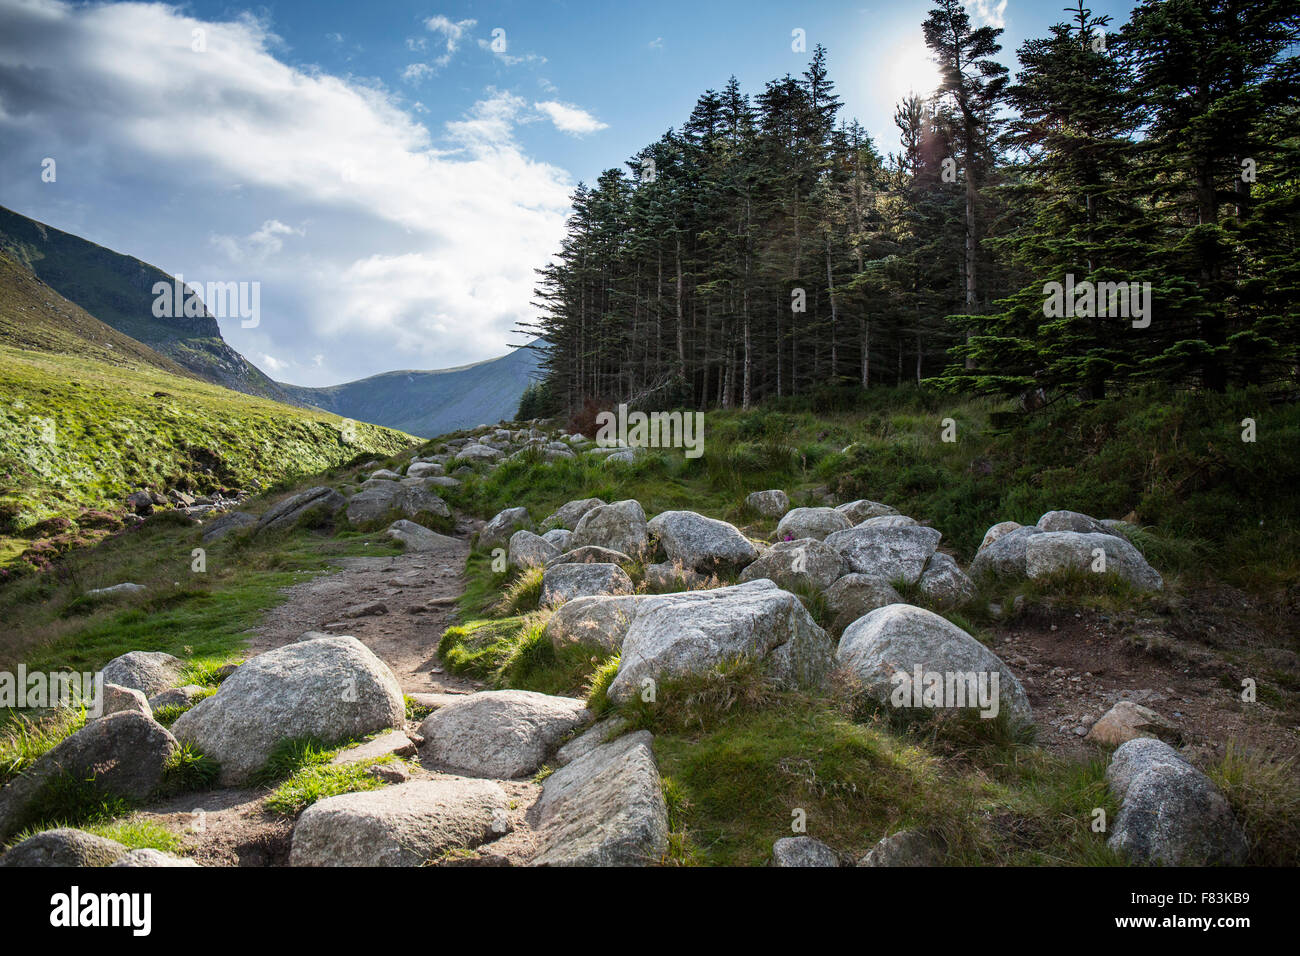 A view of the Glen river and Donard forest on the ascent to Slieve Donard. Stock Photo